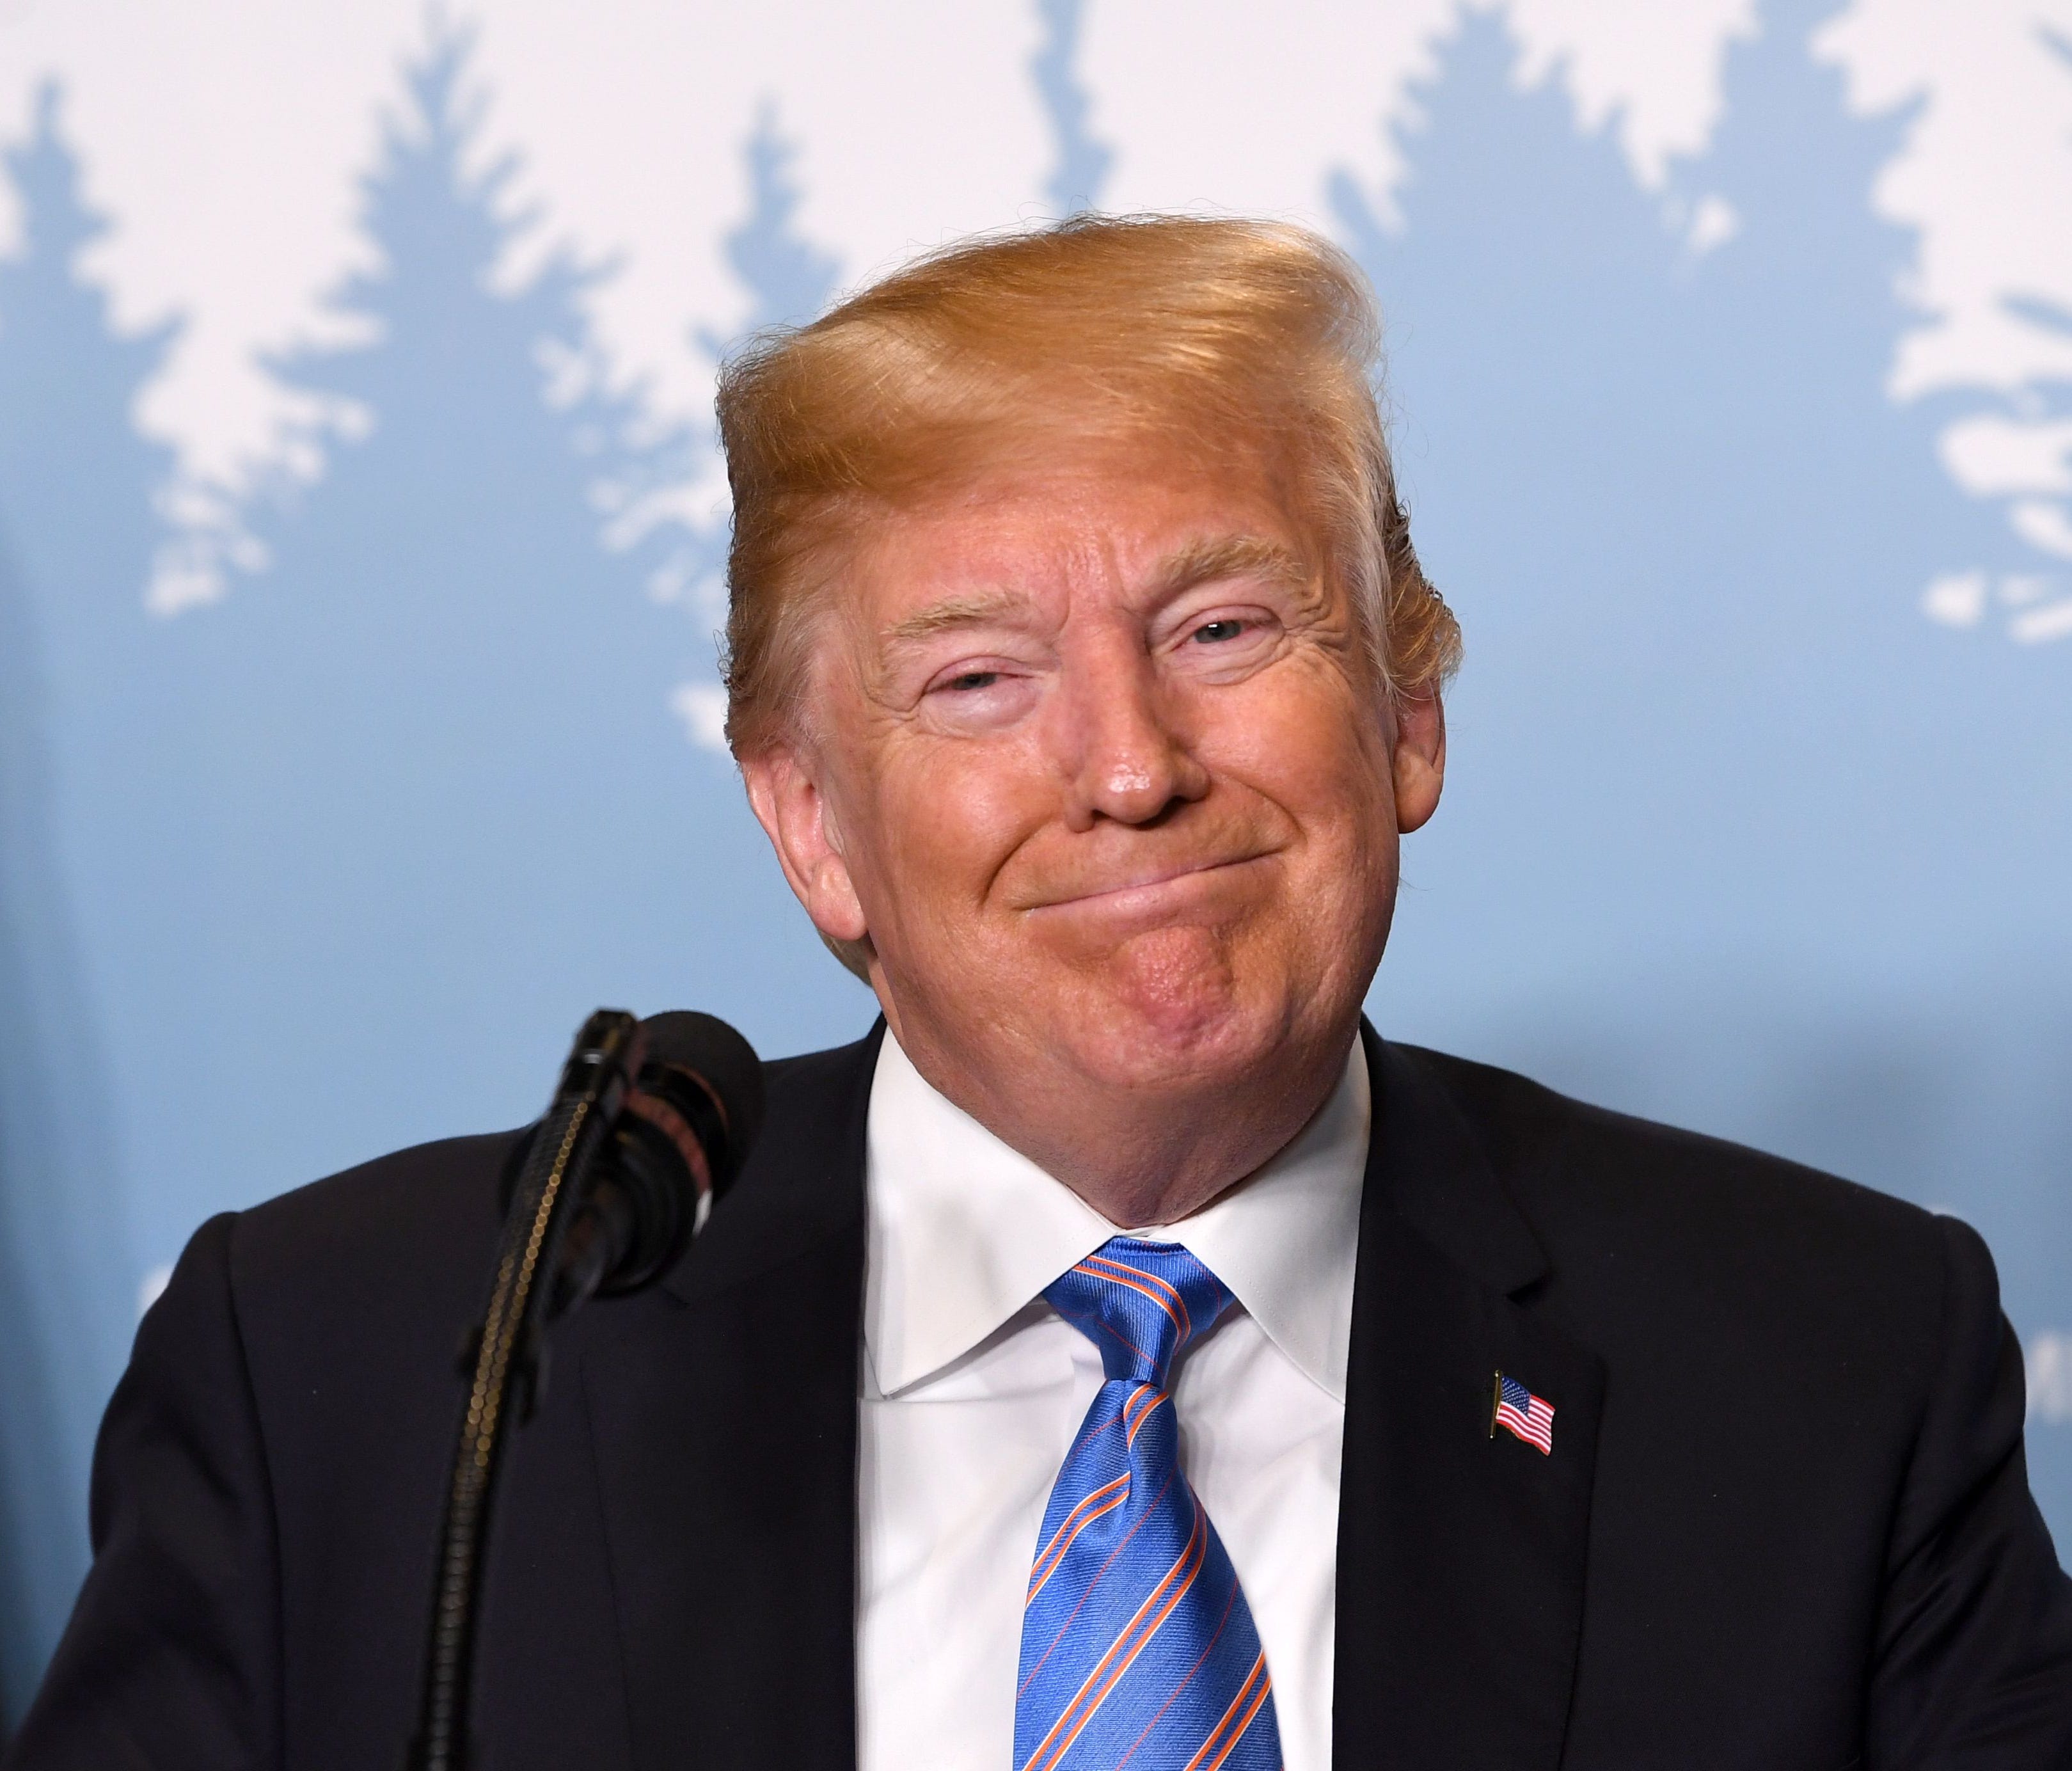 President Donald Trump speaks to reporters on June 9, 2018, during the G7 Summit in La Malbaie, Quebec, Canada.